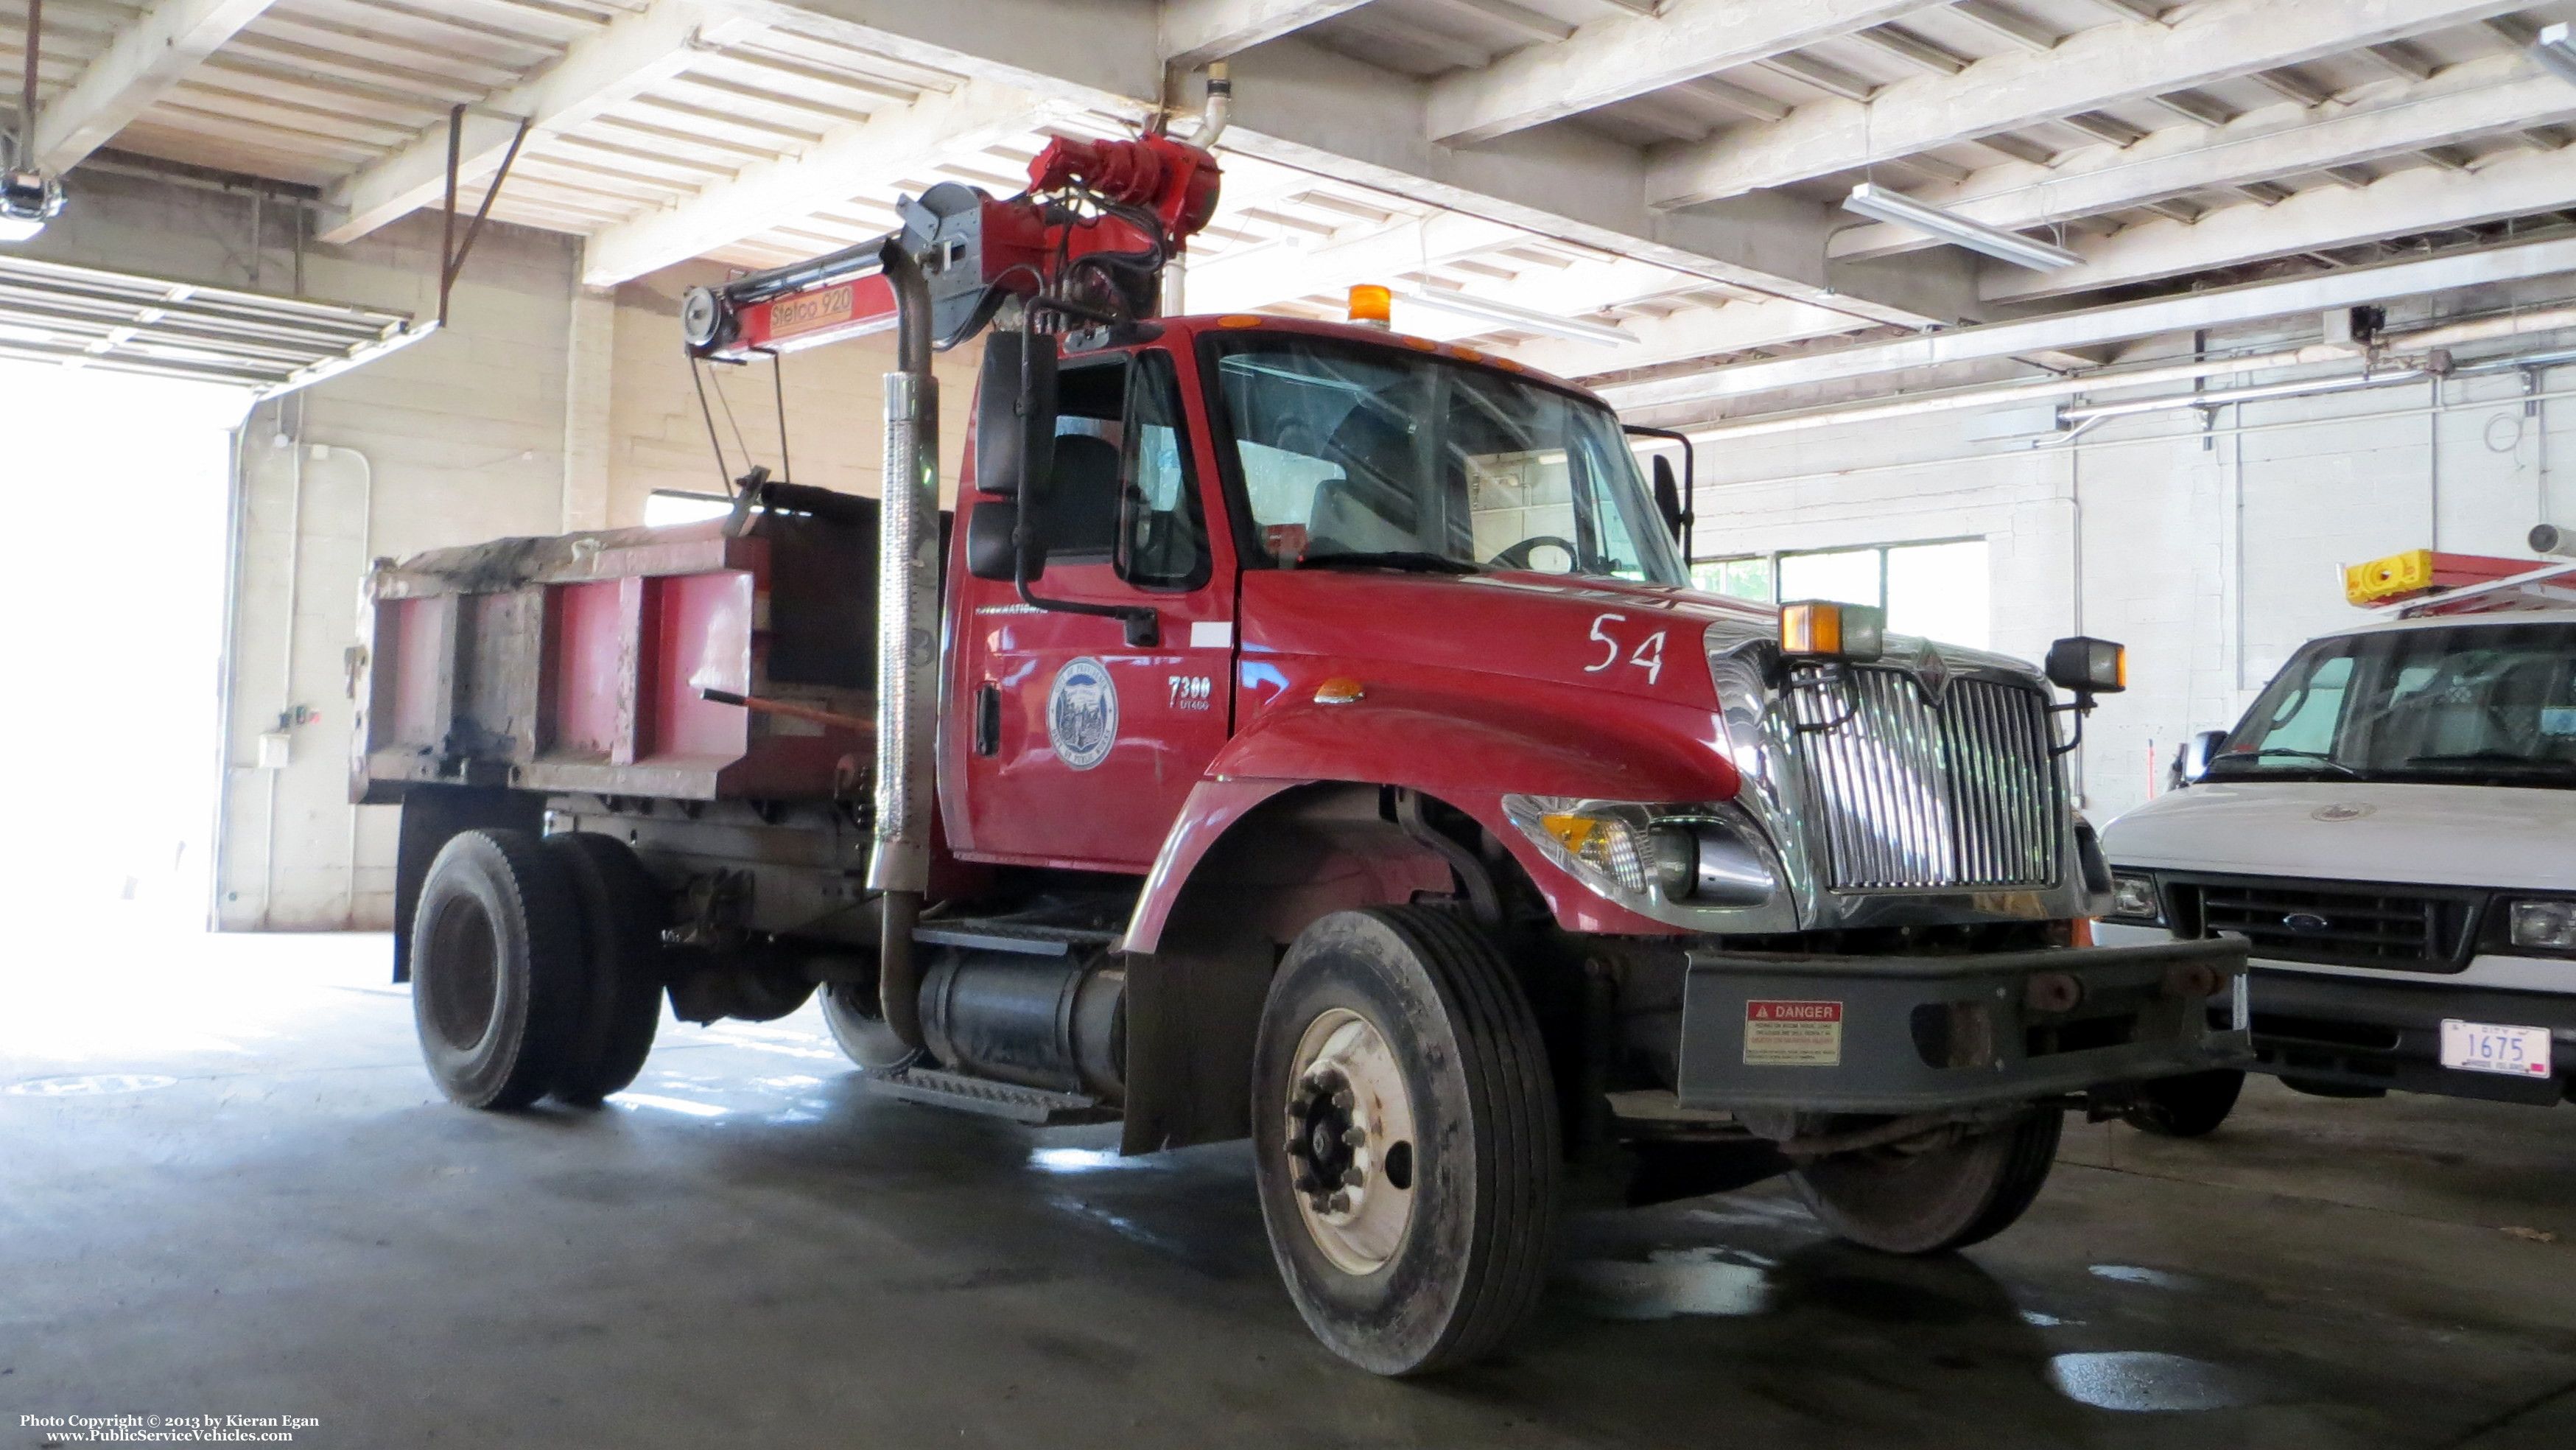 A photo  of Providence Sewer Division
            Truck 54, a 2002-2012 International 7300             taken by Kieran Egan